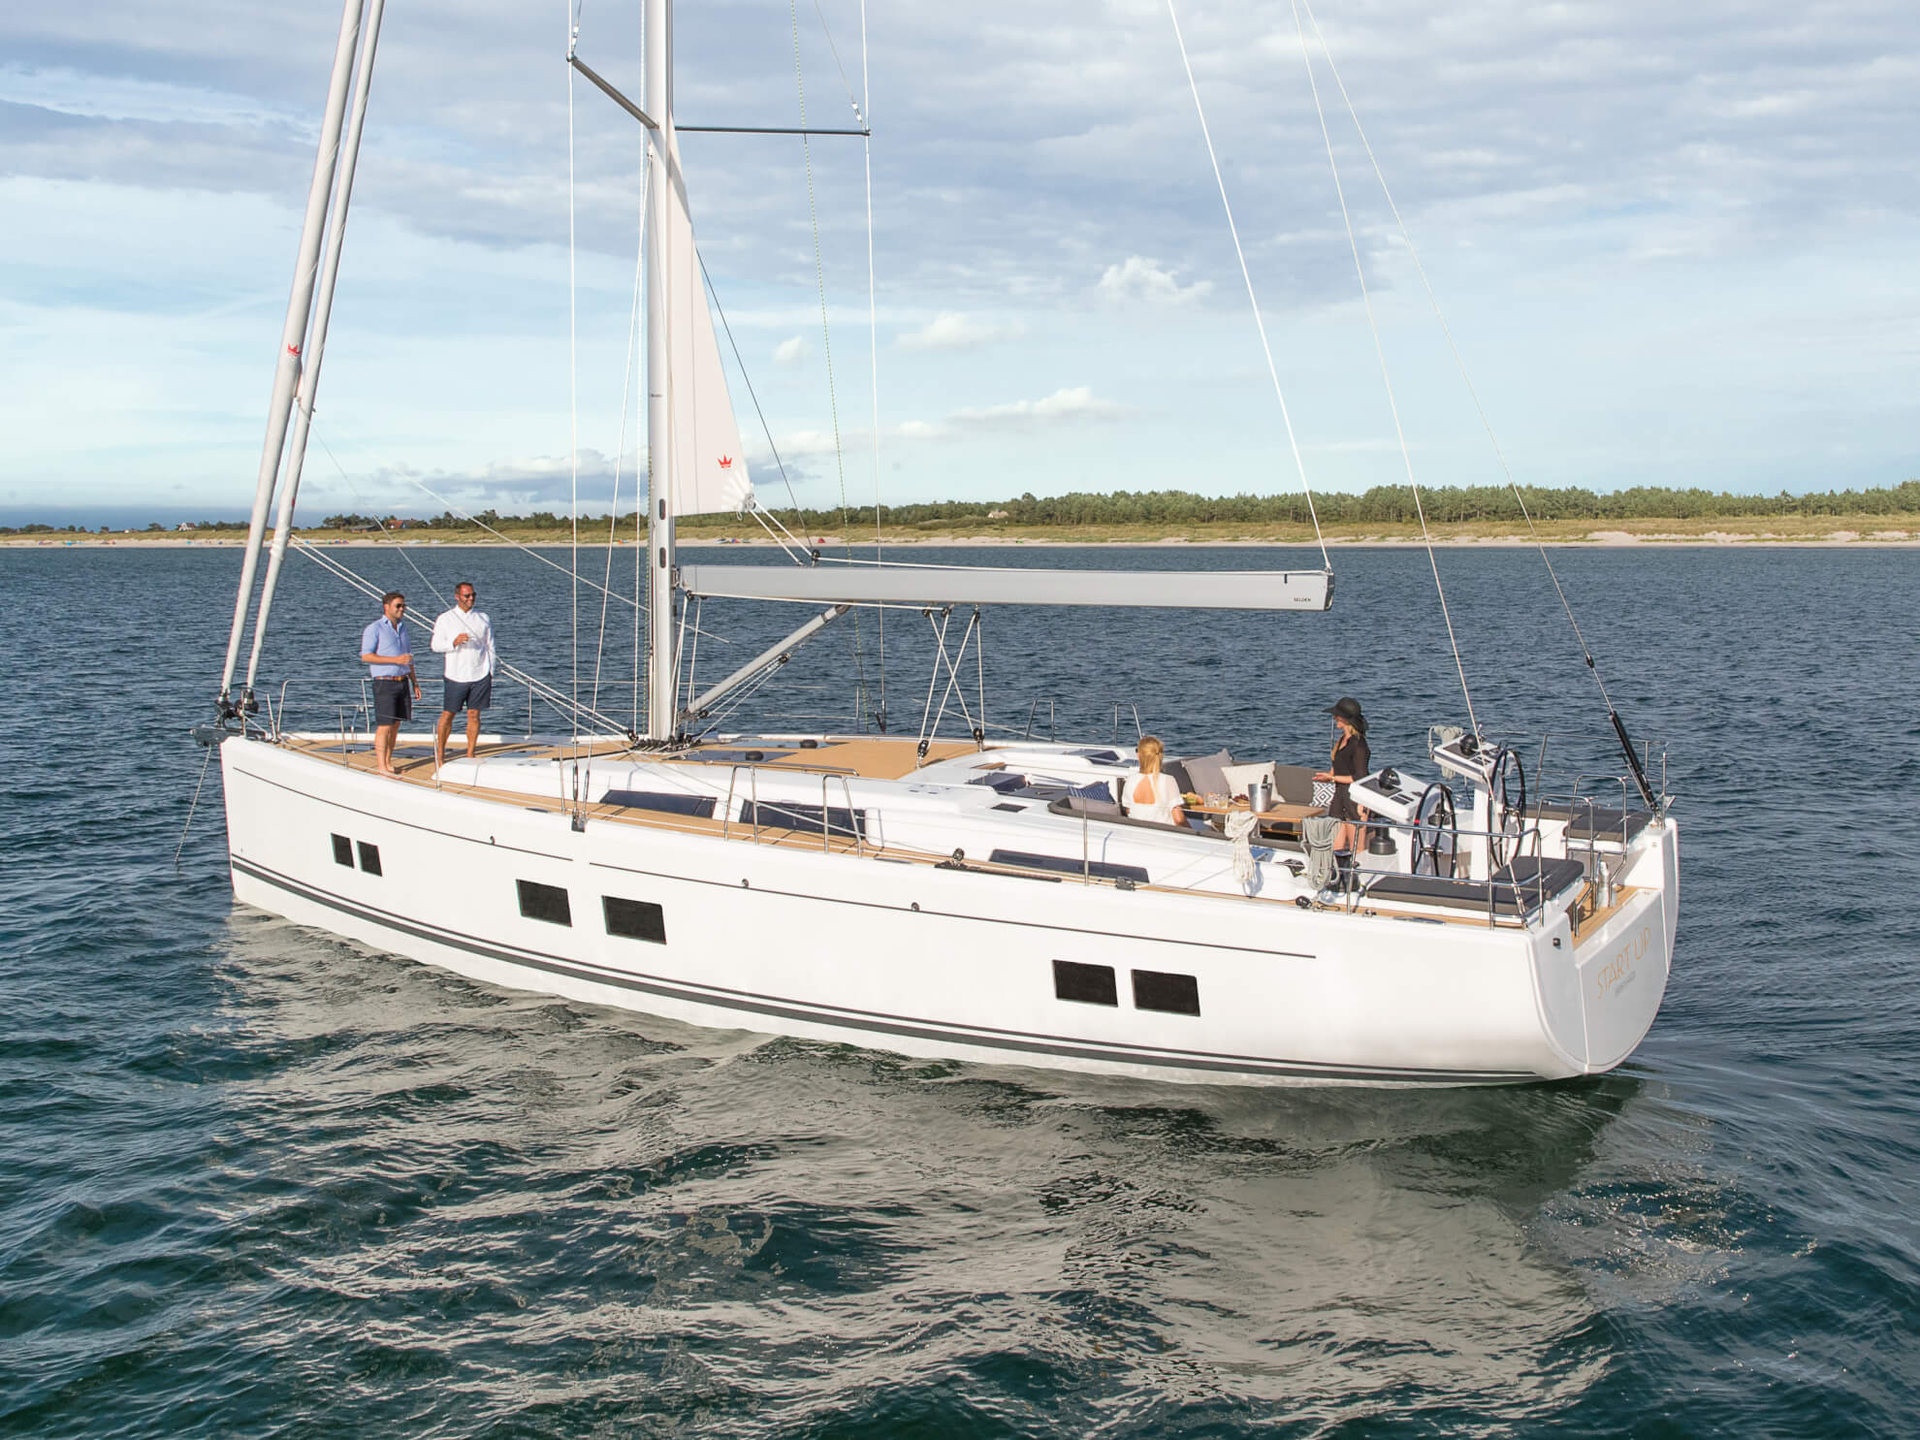 360 VR Virtual Tours of the Hanse 548